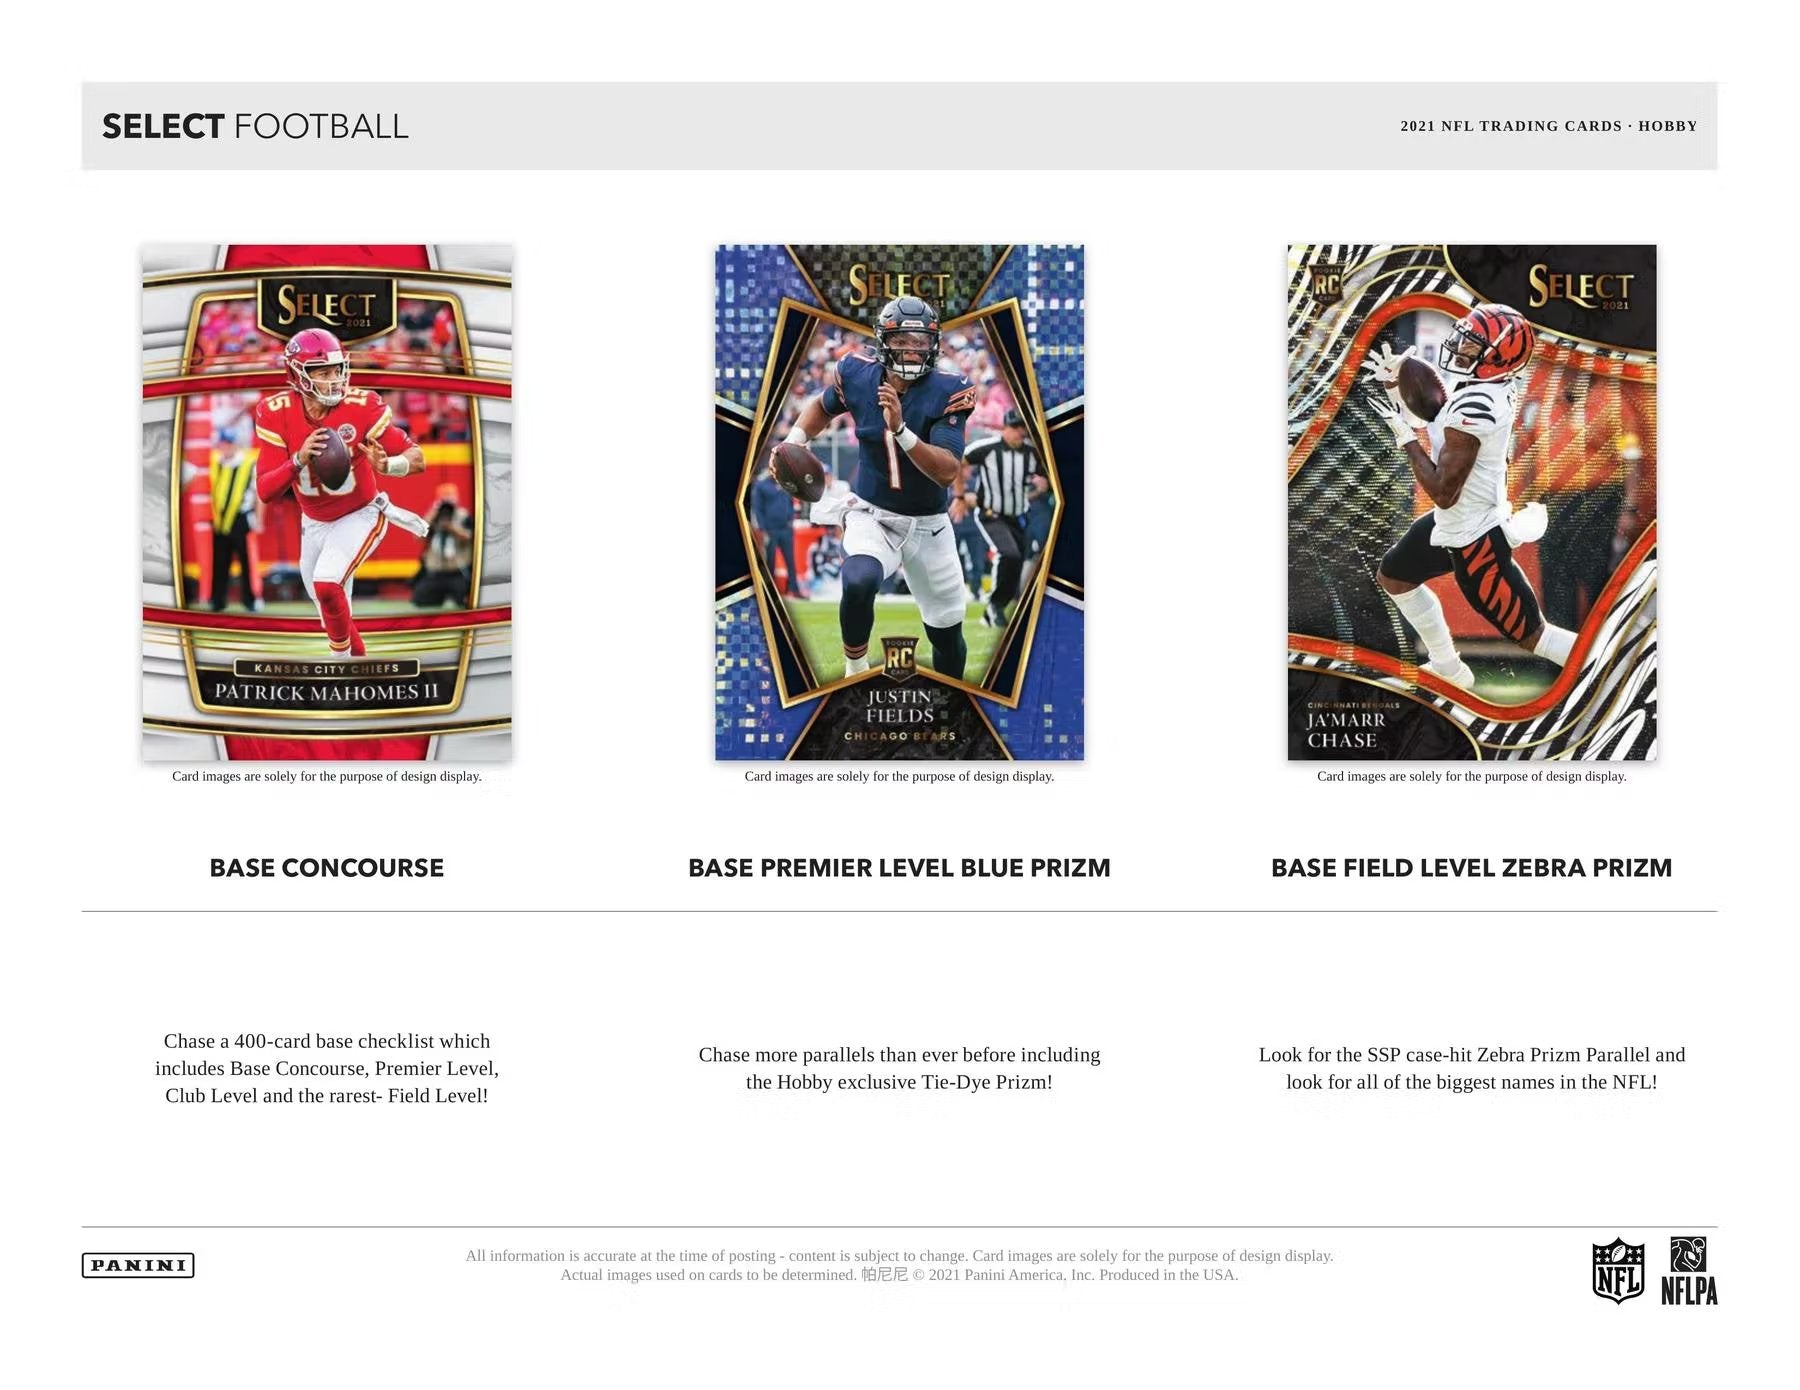 Carte a collectionner FOOT 2020-21 5 pochettes + 2 albums offerts - Panini  - Football - La Poste